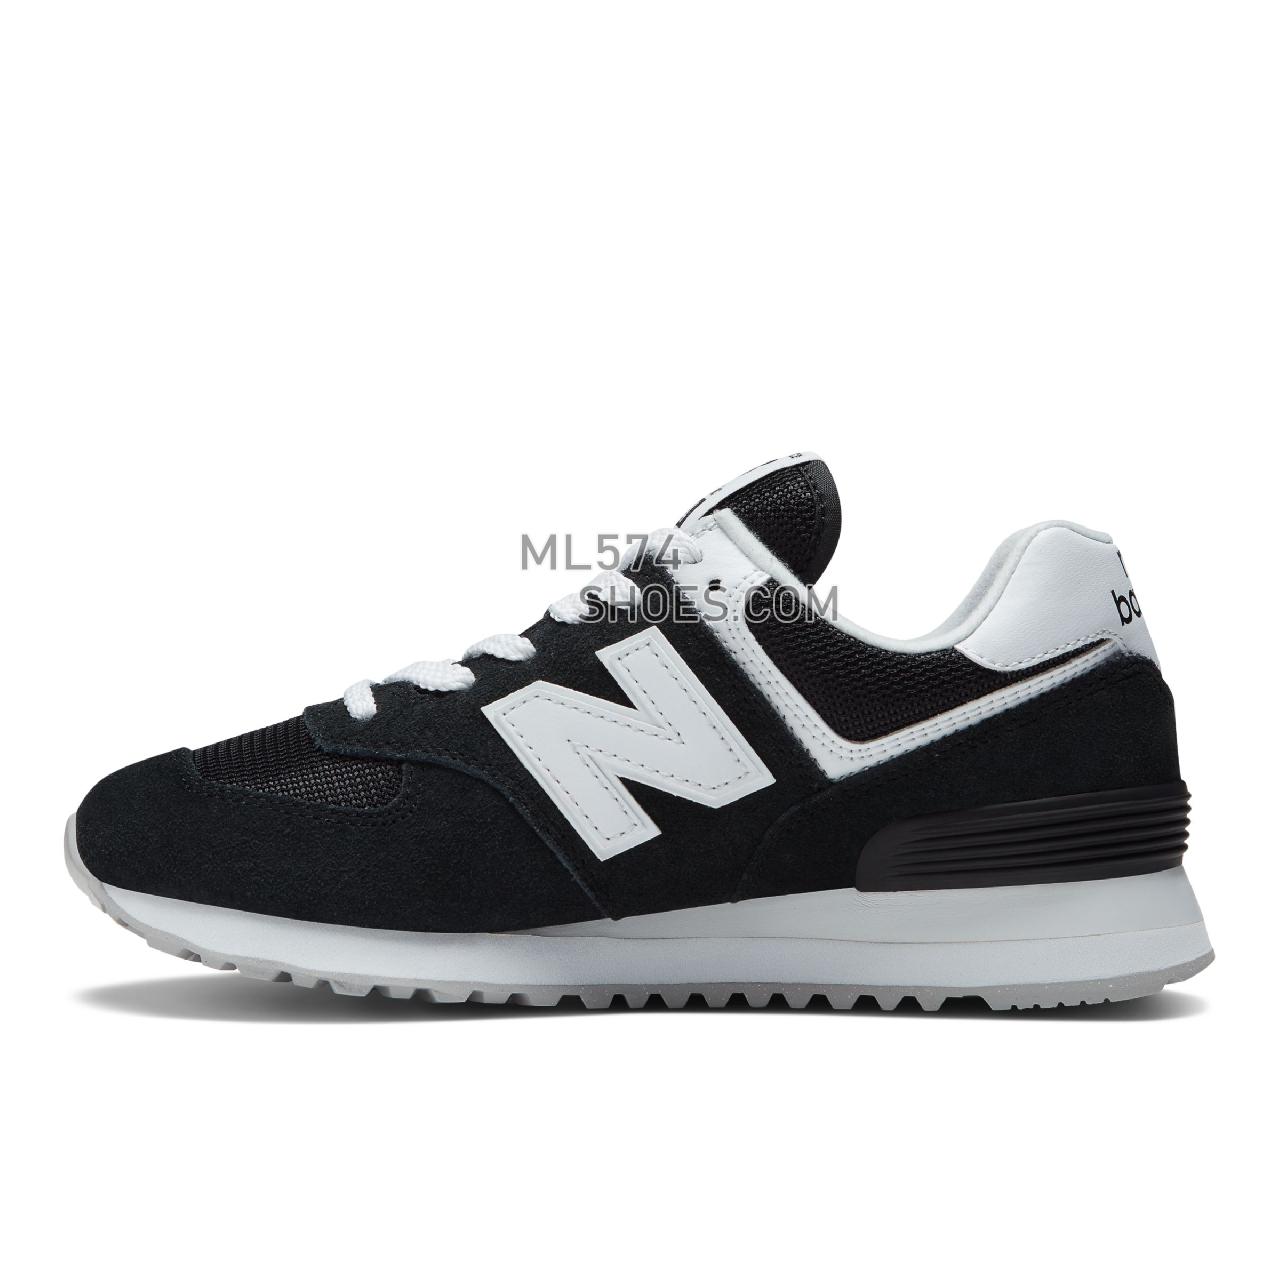 New Balance 574v2 - Women's Classic Sneakers - Black with White - WL574FQ2